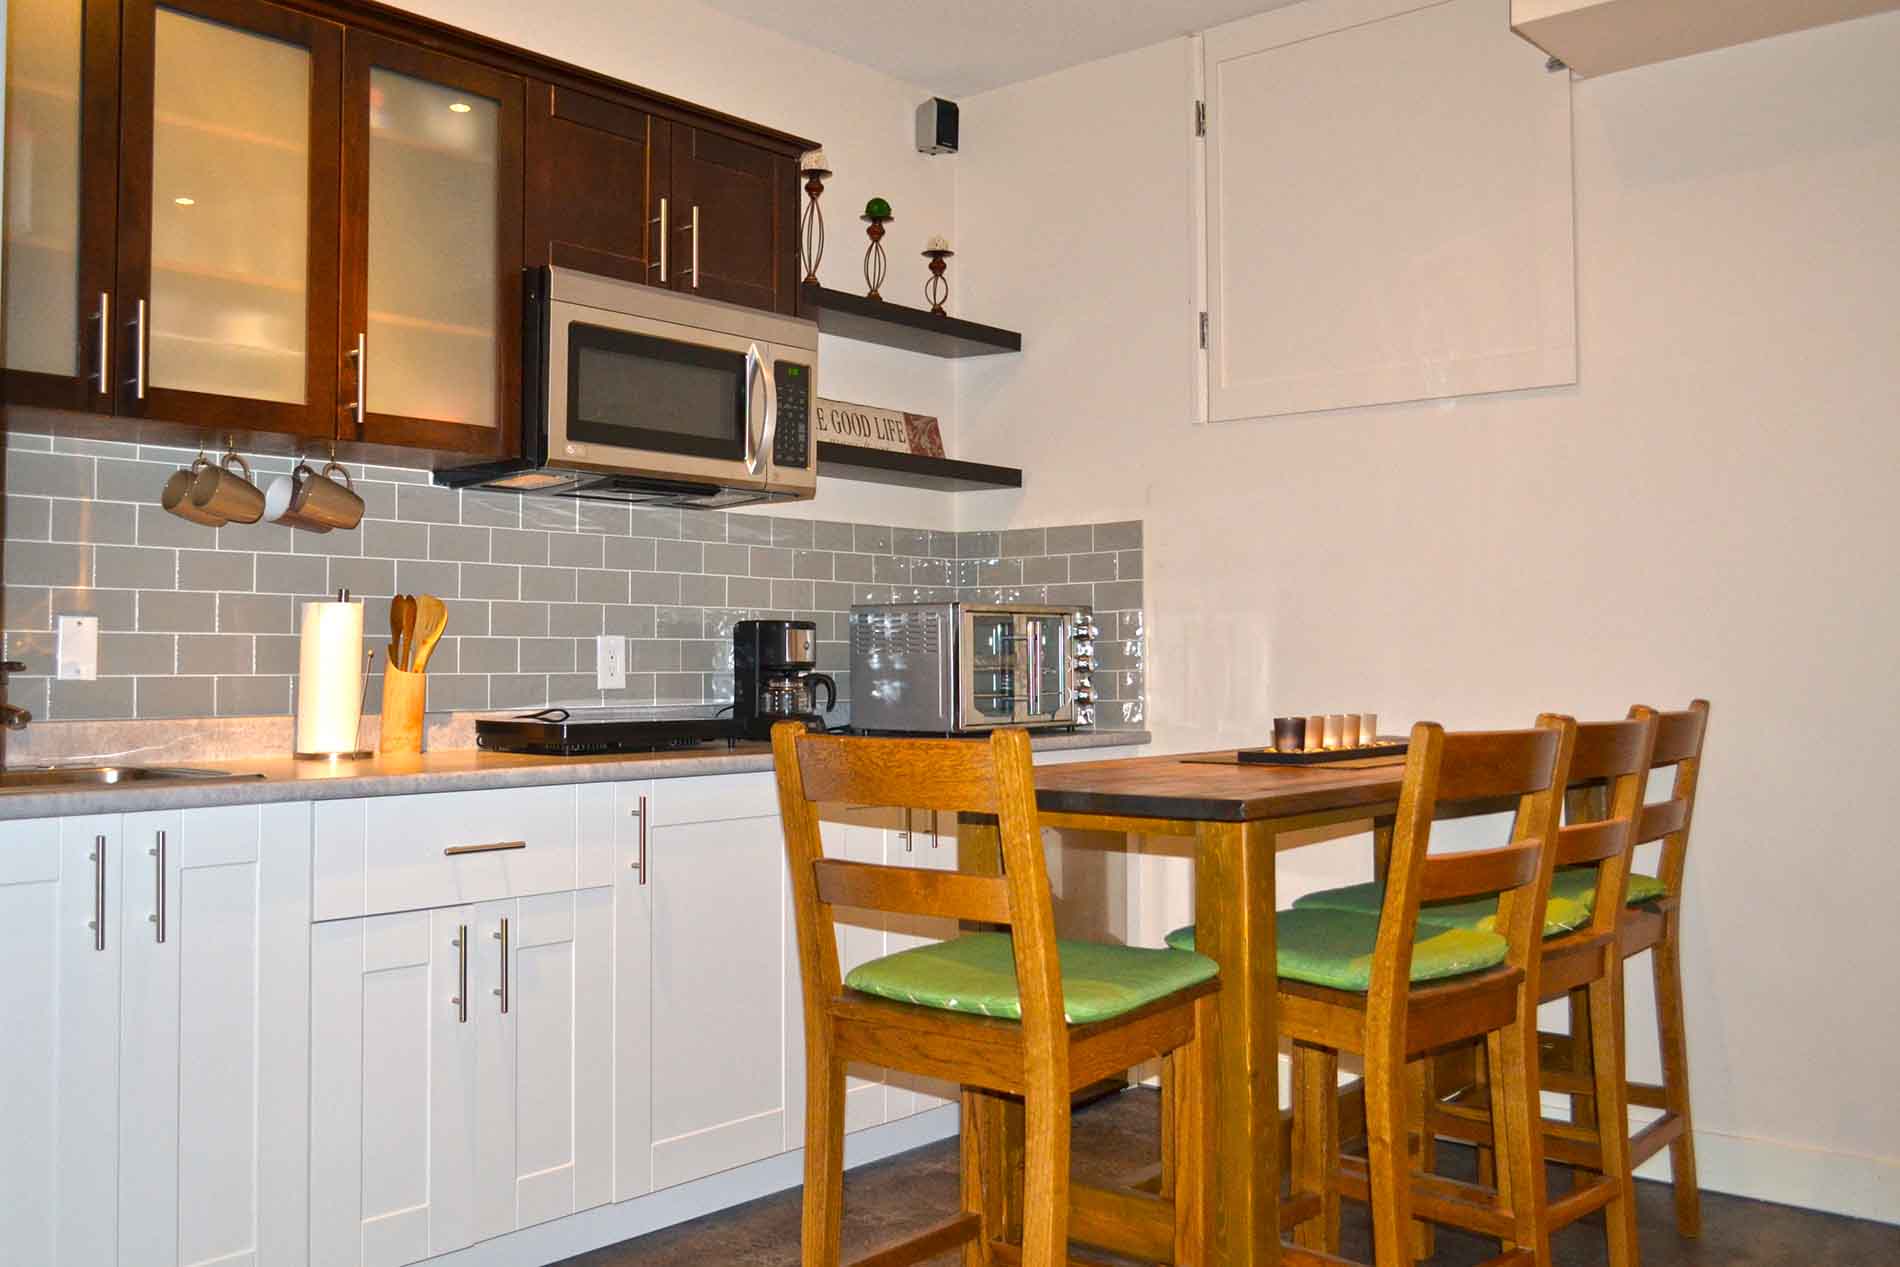 Kitchen Peachland Bed Breakfast Accommodation With Pool